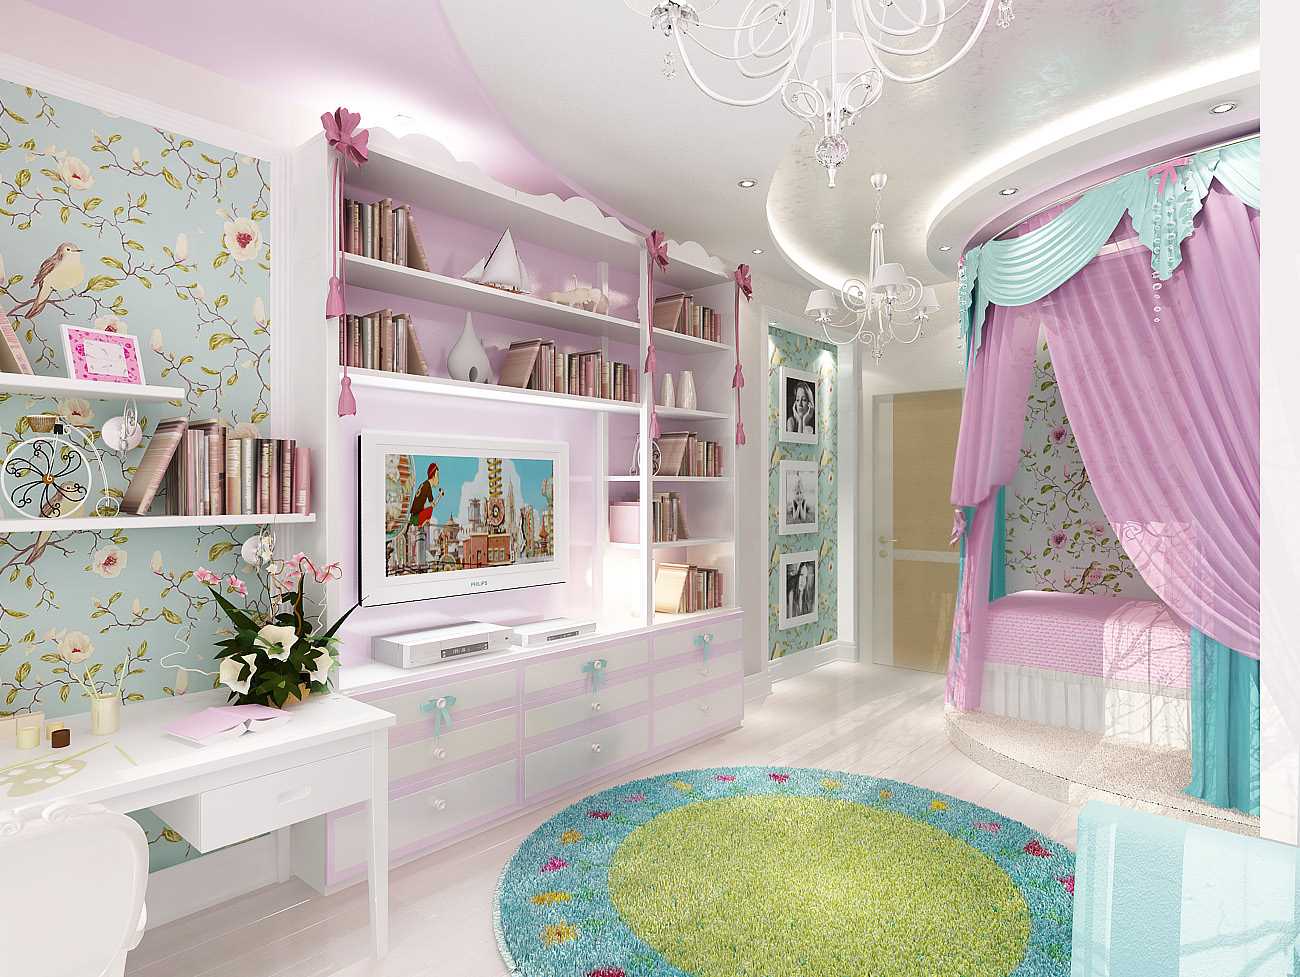 variant of unusual bedroom decor for a girl in a modern style